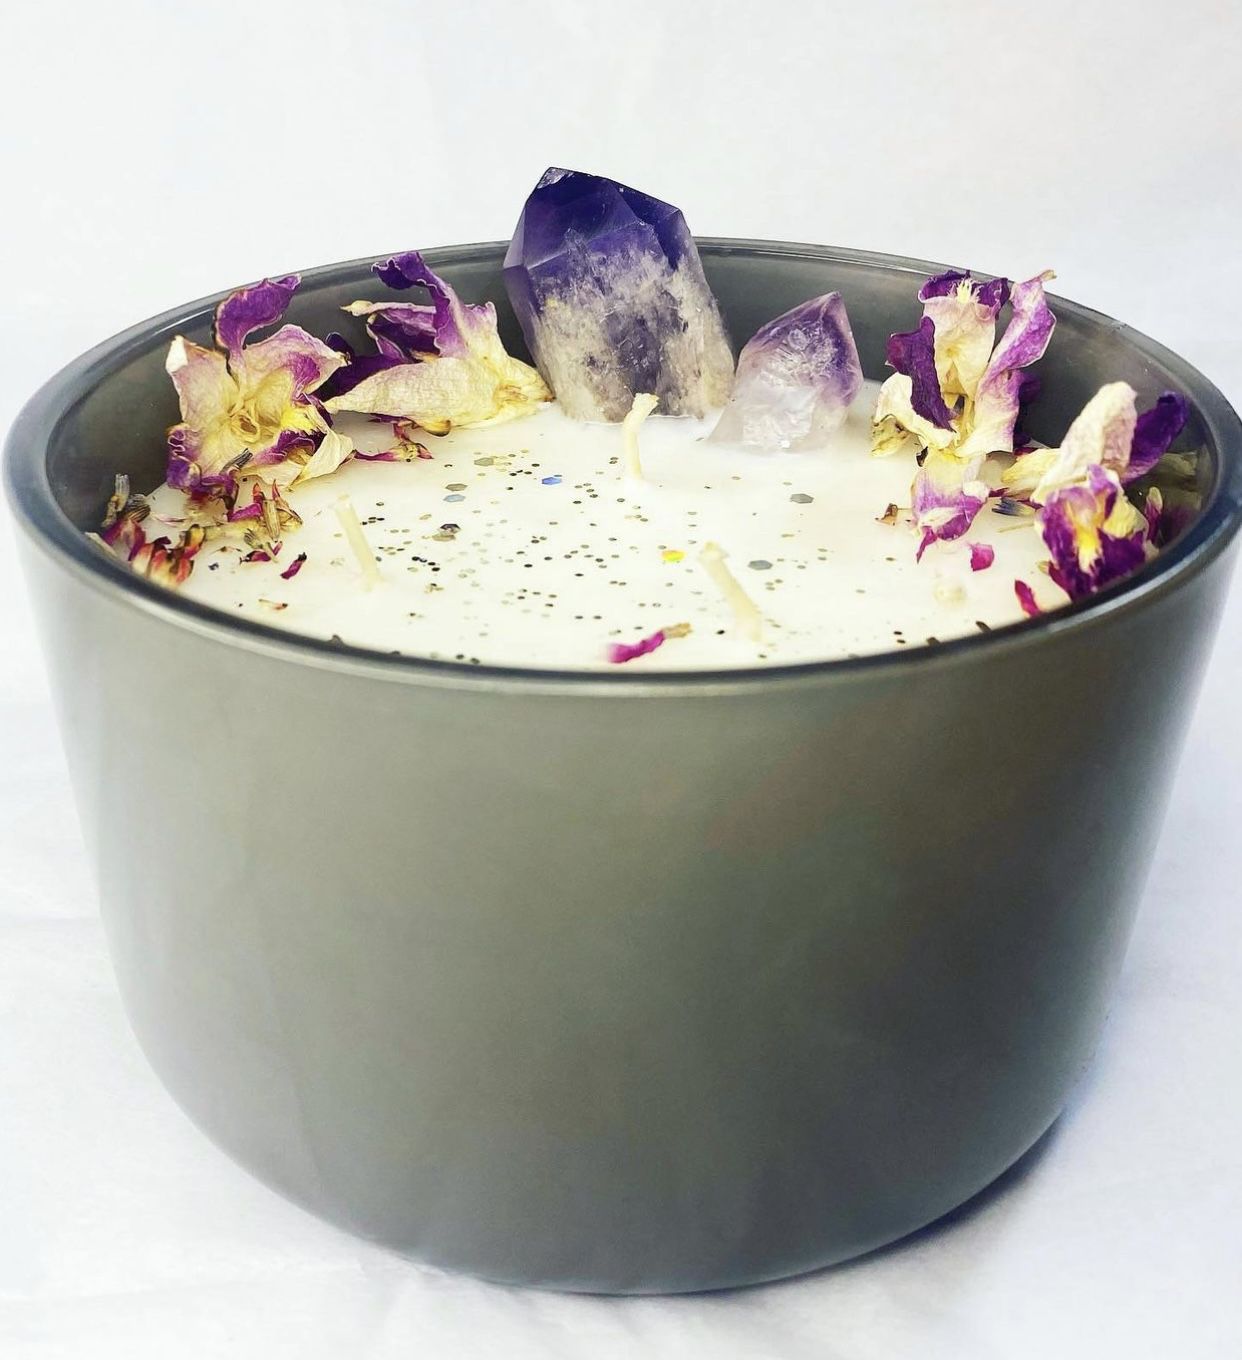 Healing/Cleansing candles with Crystals